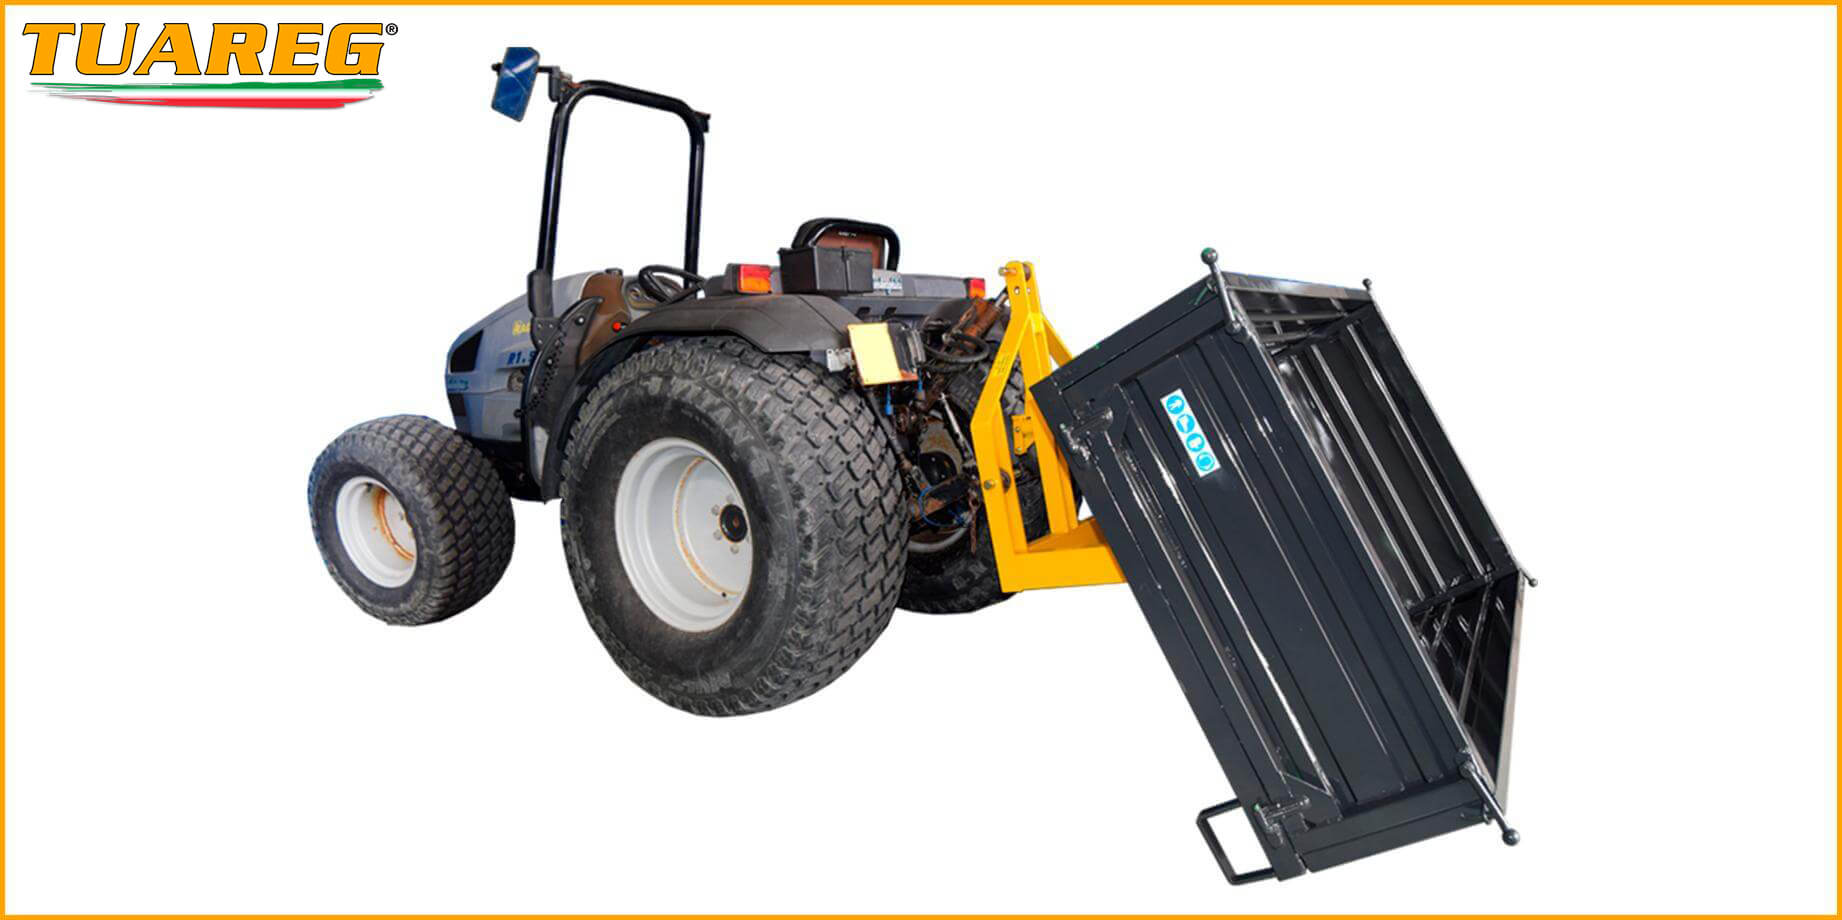 Loading Box - Tuareg - Tractor towed equipment for beach cleaning